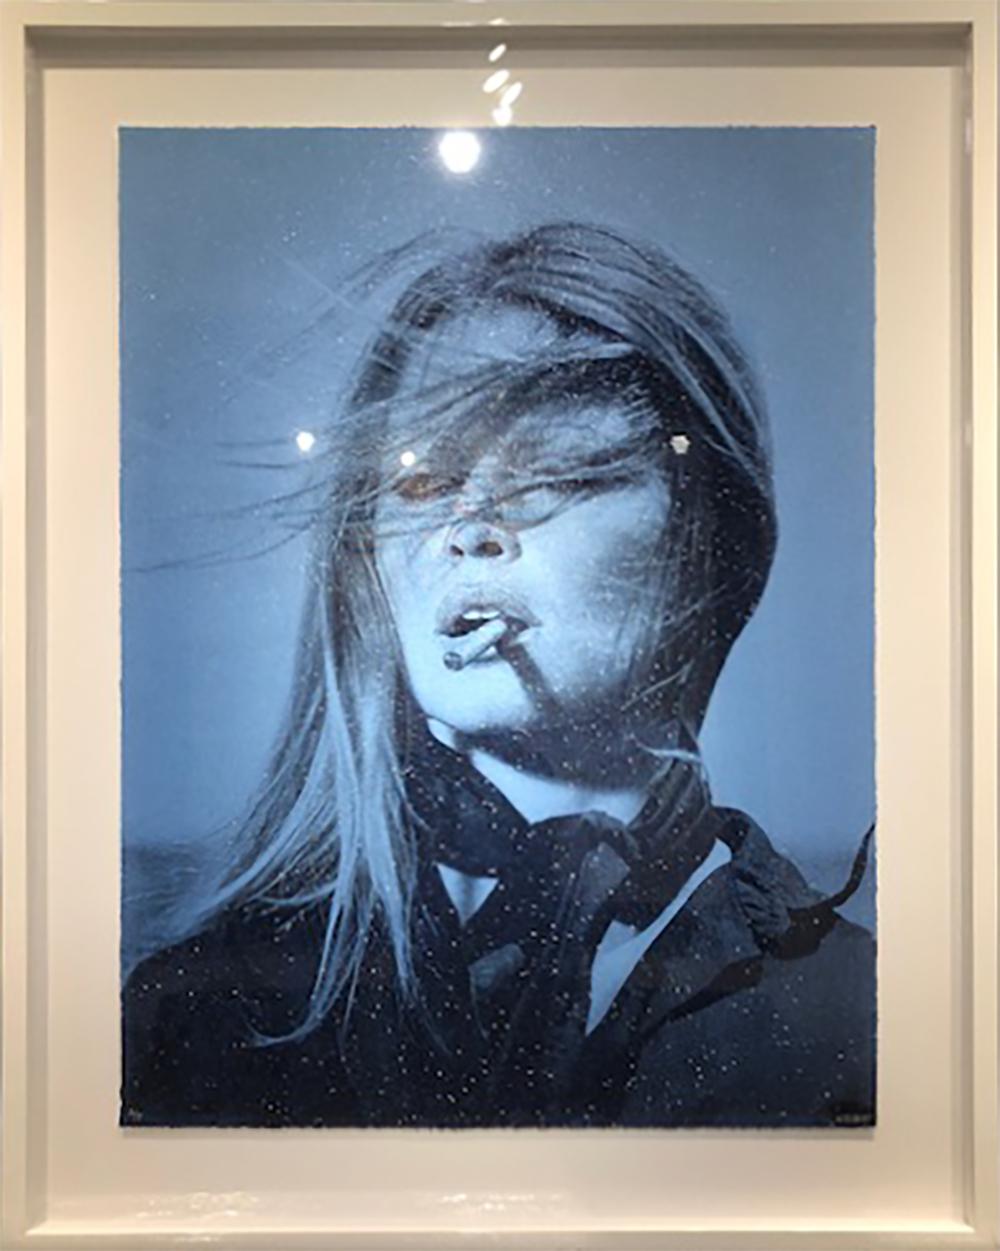 Hand-signed by K E I K O
In collaboration with photographer Terry O'Neill
Hand-pulled silk screen on cotton rag paper, Diamond Dusted
Limited Edition of 15

Brigitte Bardot Cigar strikes a chord with most recognized screenprints from warhols